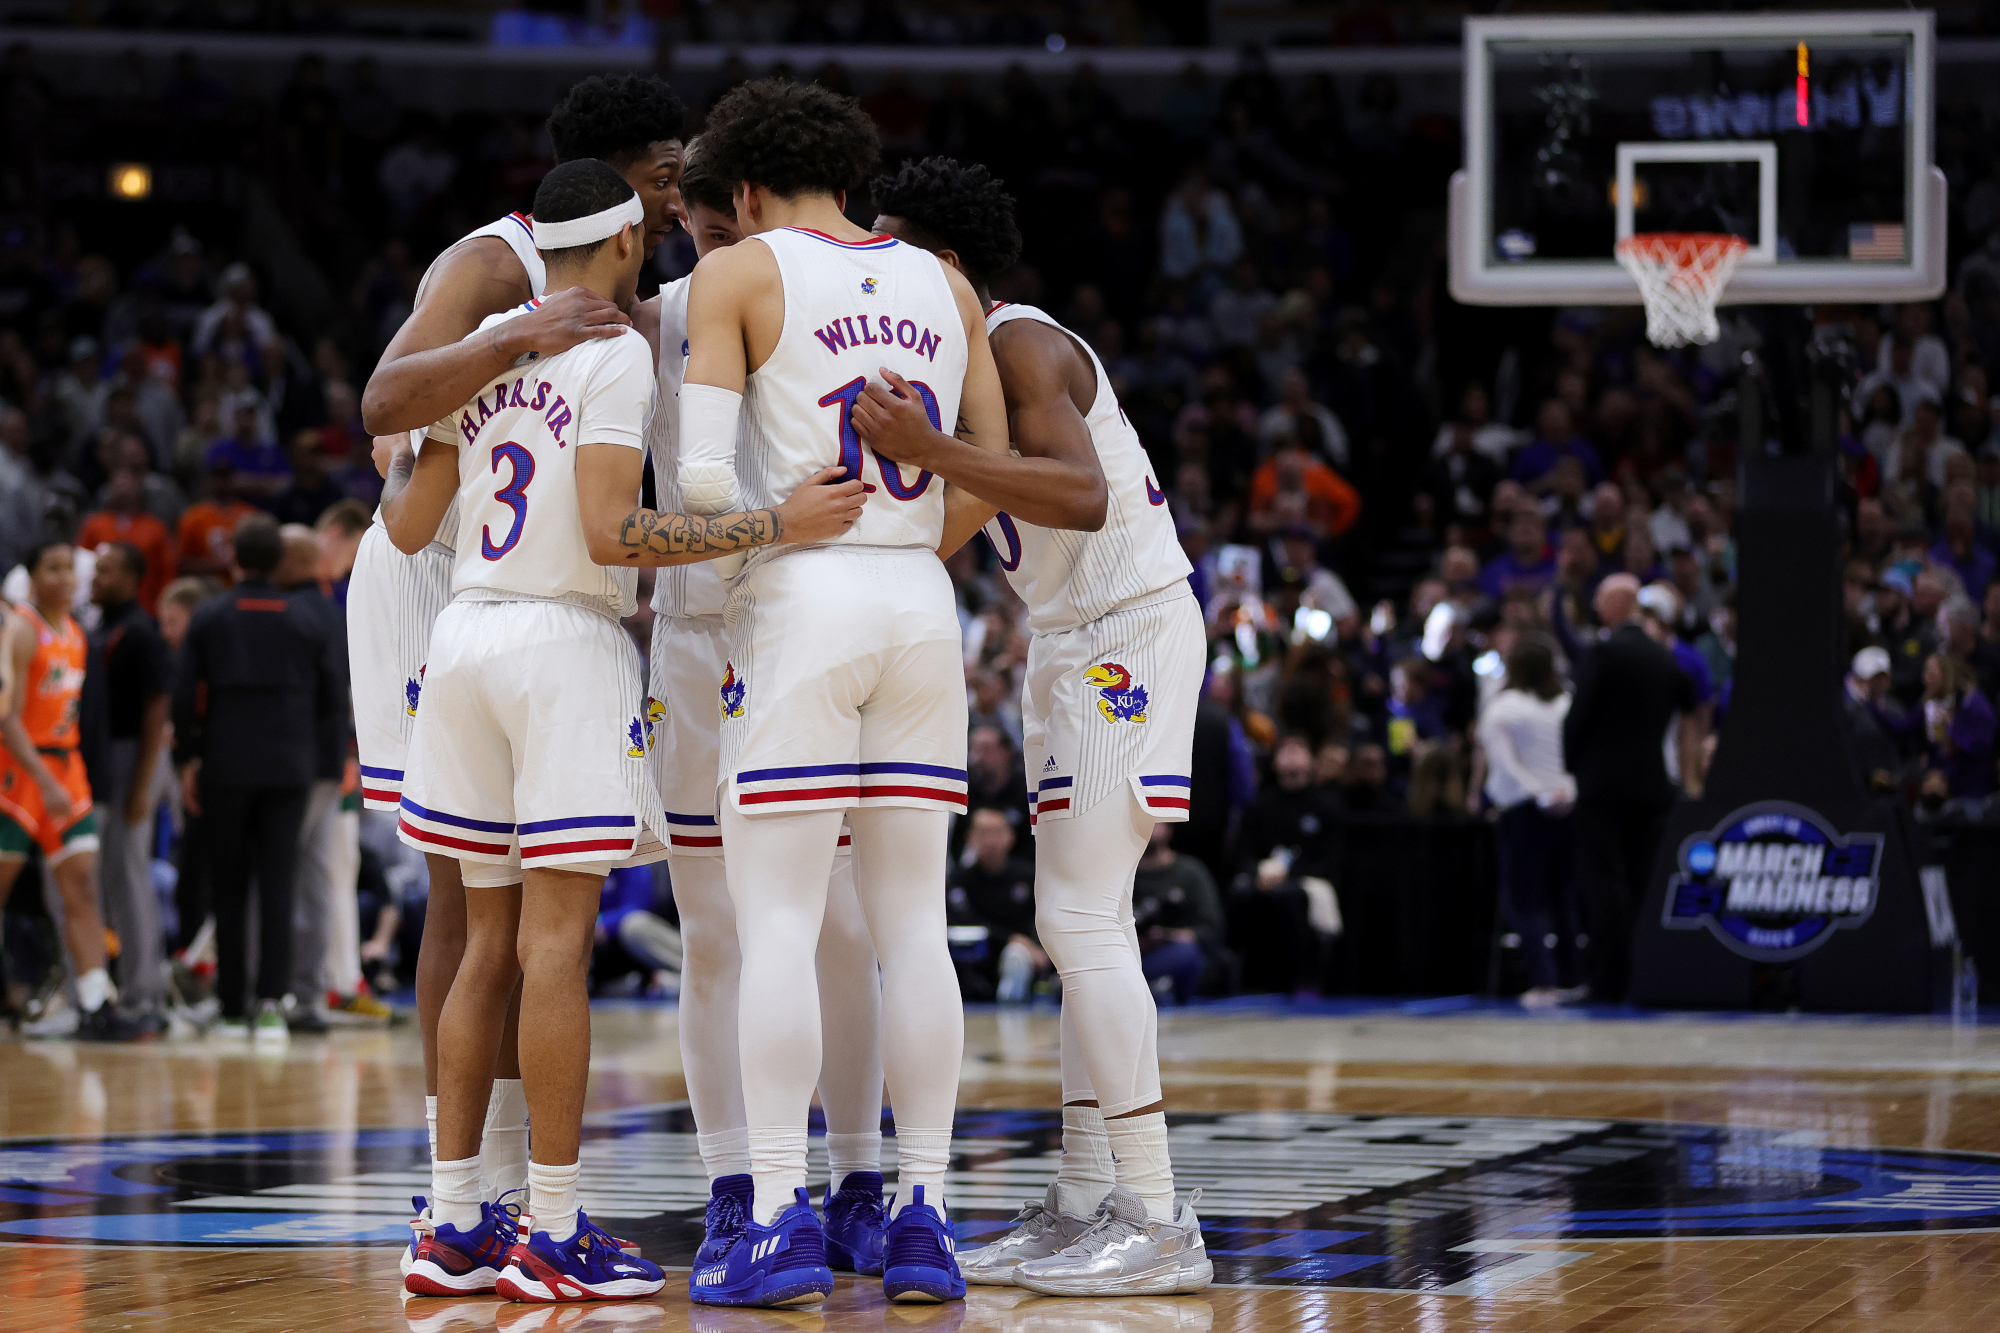 The Kansas Jayhawks huddle before the Elite Eight round game of the 2022 NCAA Men's Basketball Tournament against the Miami Hurricanes at United Center on March 27, 2022 in Chicago, Illinois.